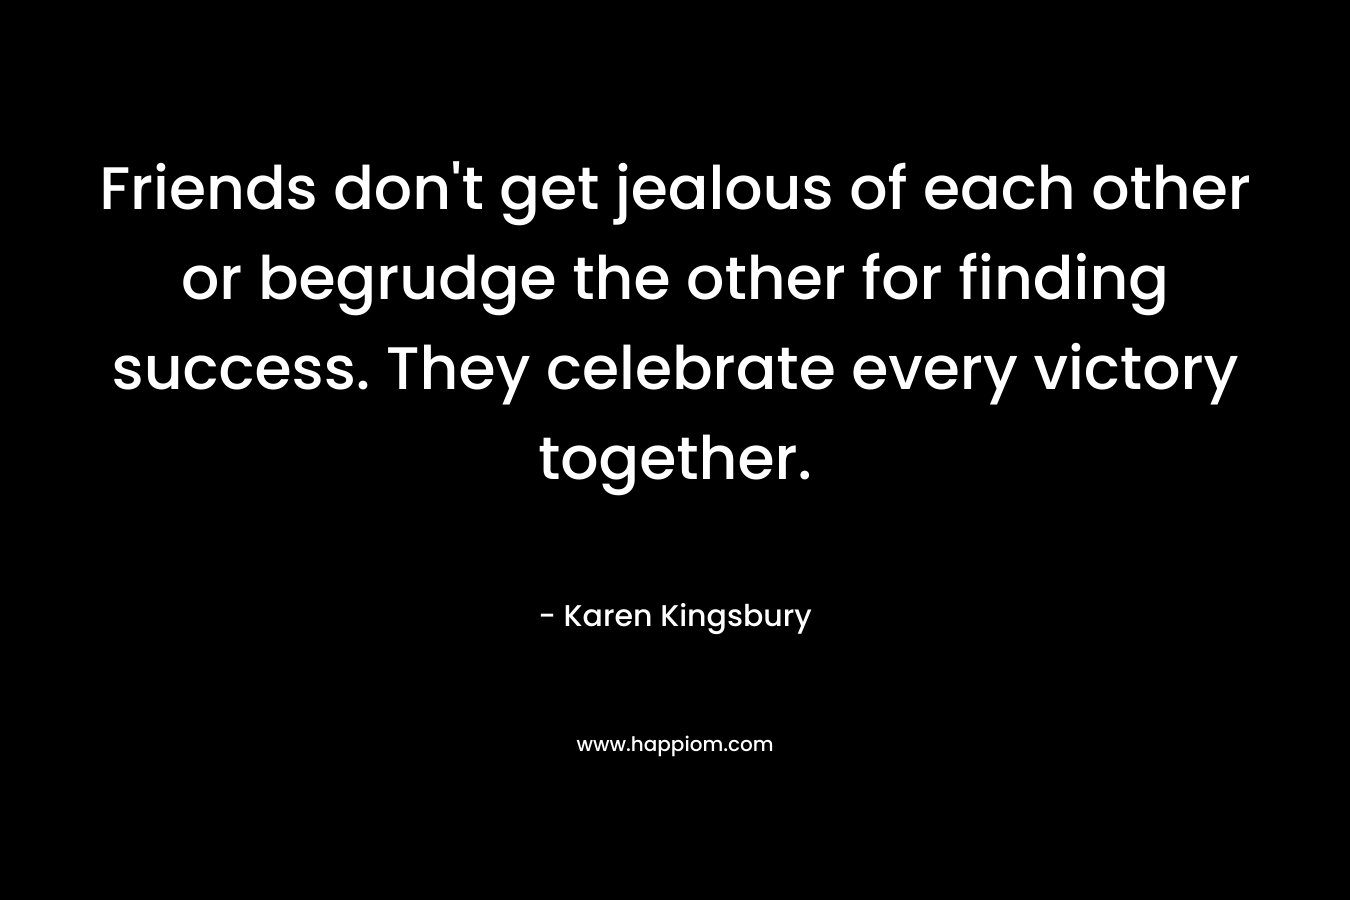 Friends don’t get jealous of each other or begrudge the other for finding success. They celebrate every victory together. – Karen Kingsbury